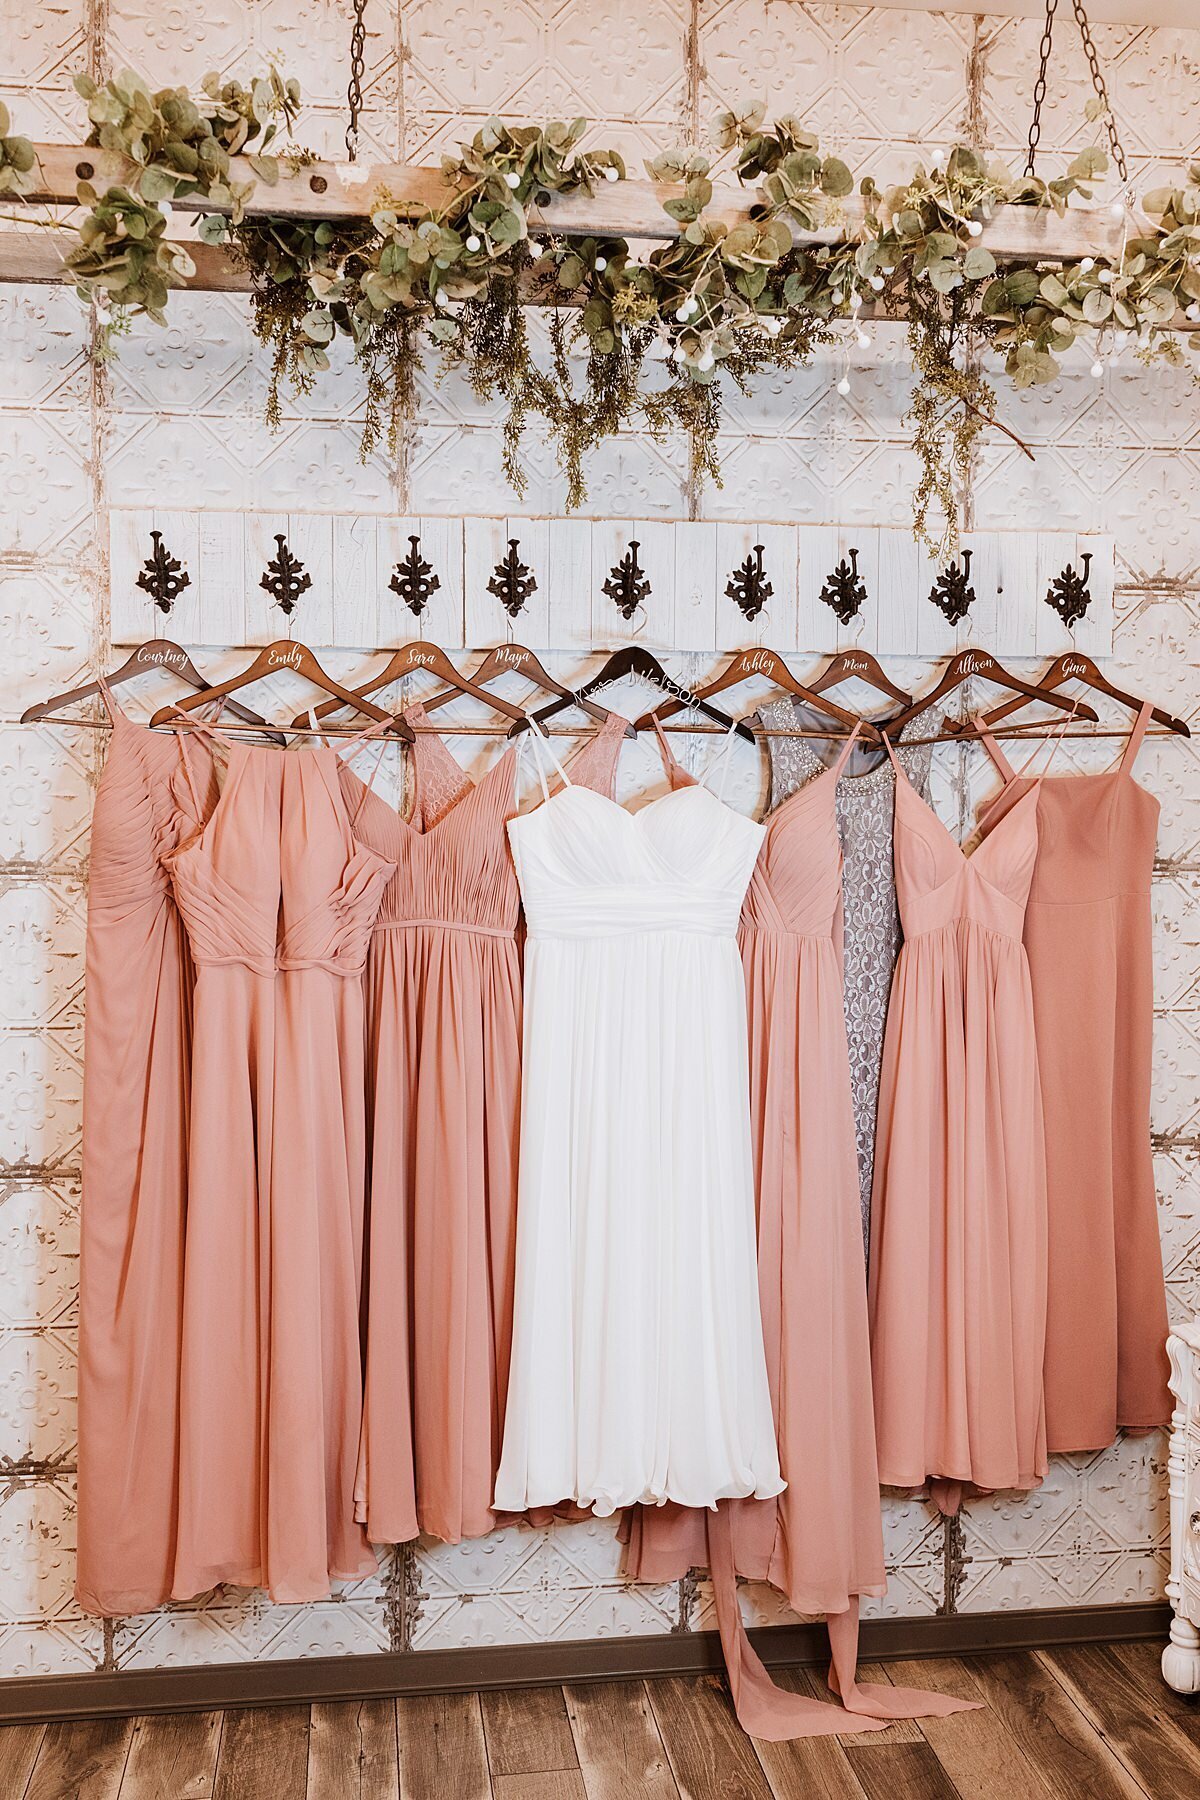 Mismatched blush bridesmaid dresses hanging on personalized wooden hangers with a white satin wedding dress from fleur de lis hooks against a white pressed tin wall with hanging greenery above at Steel Magnolia Barn.